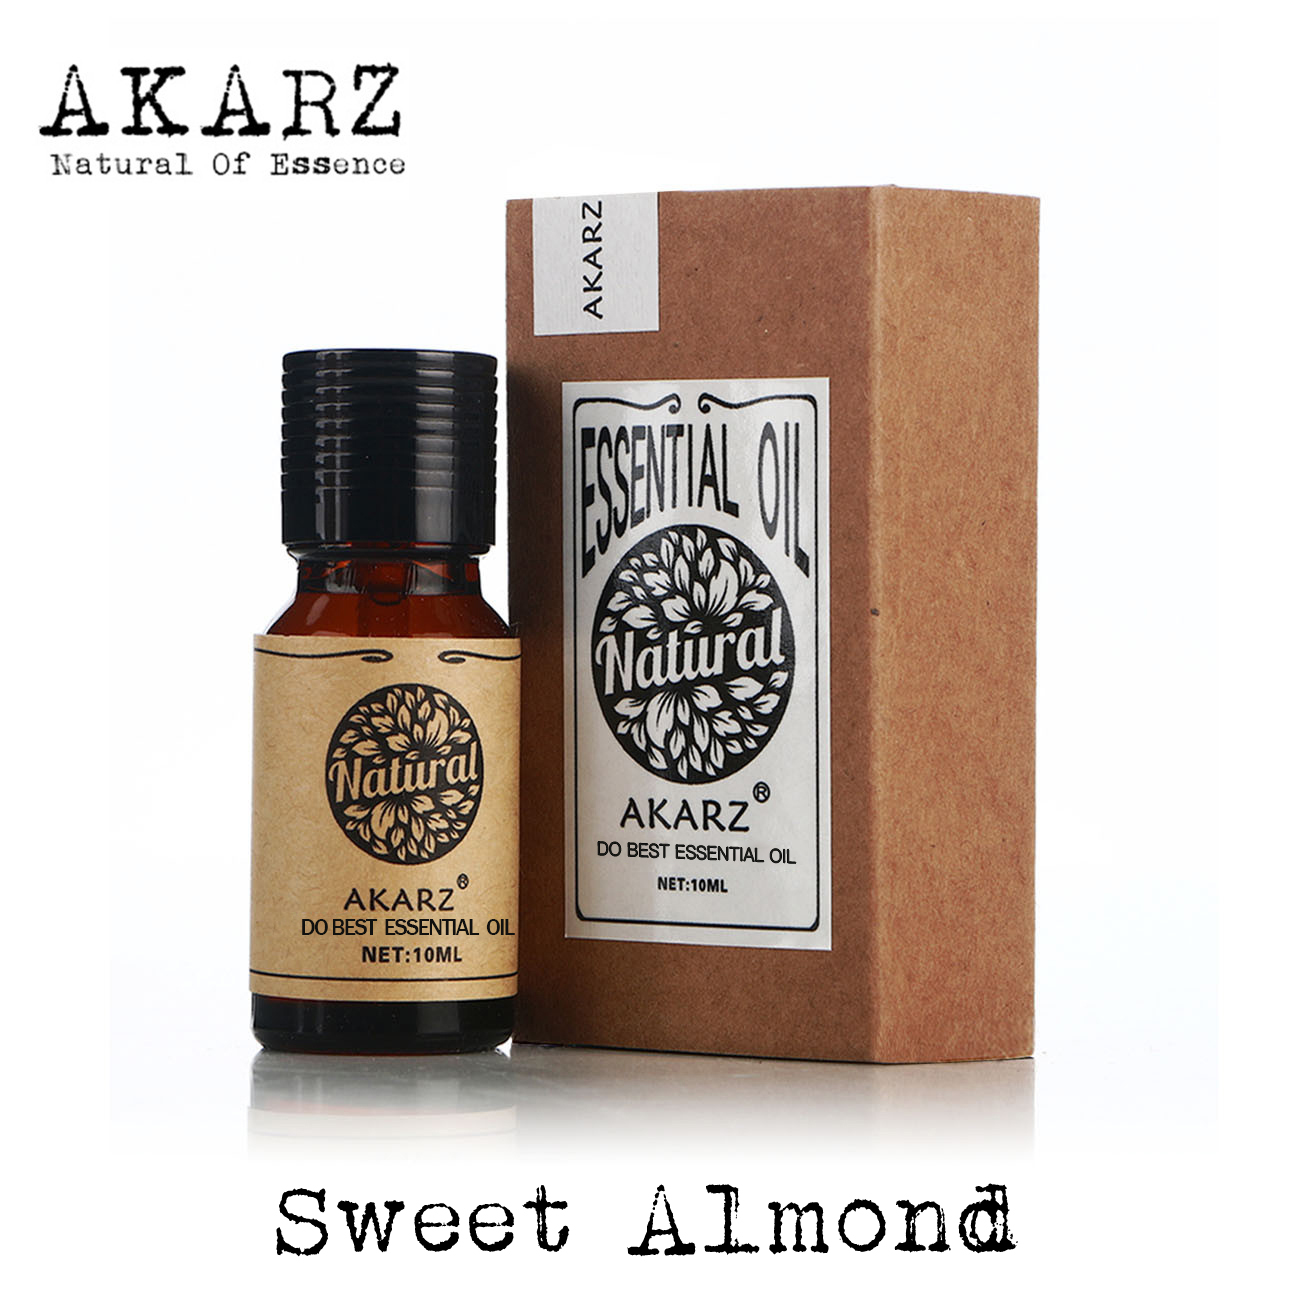 AKARZ Famous brand natural aromatherapy sweet almond oil essential oil Smooth skin moisturizing remove stretch marks